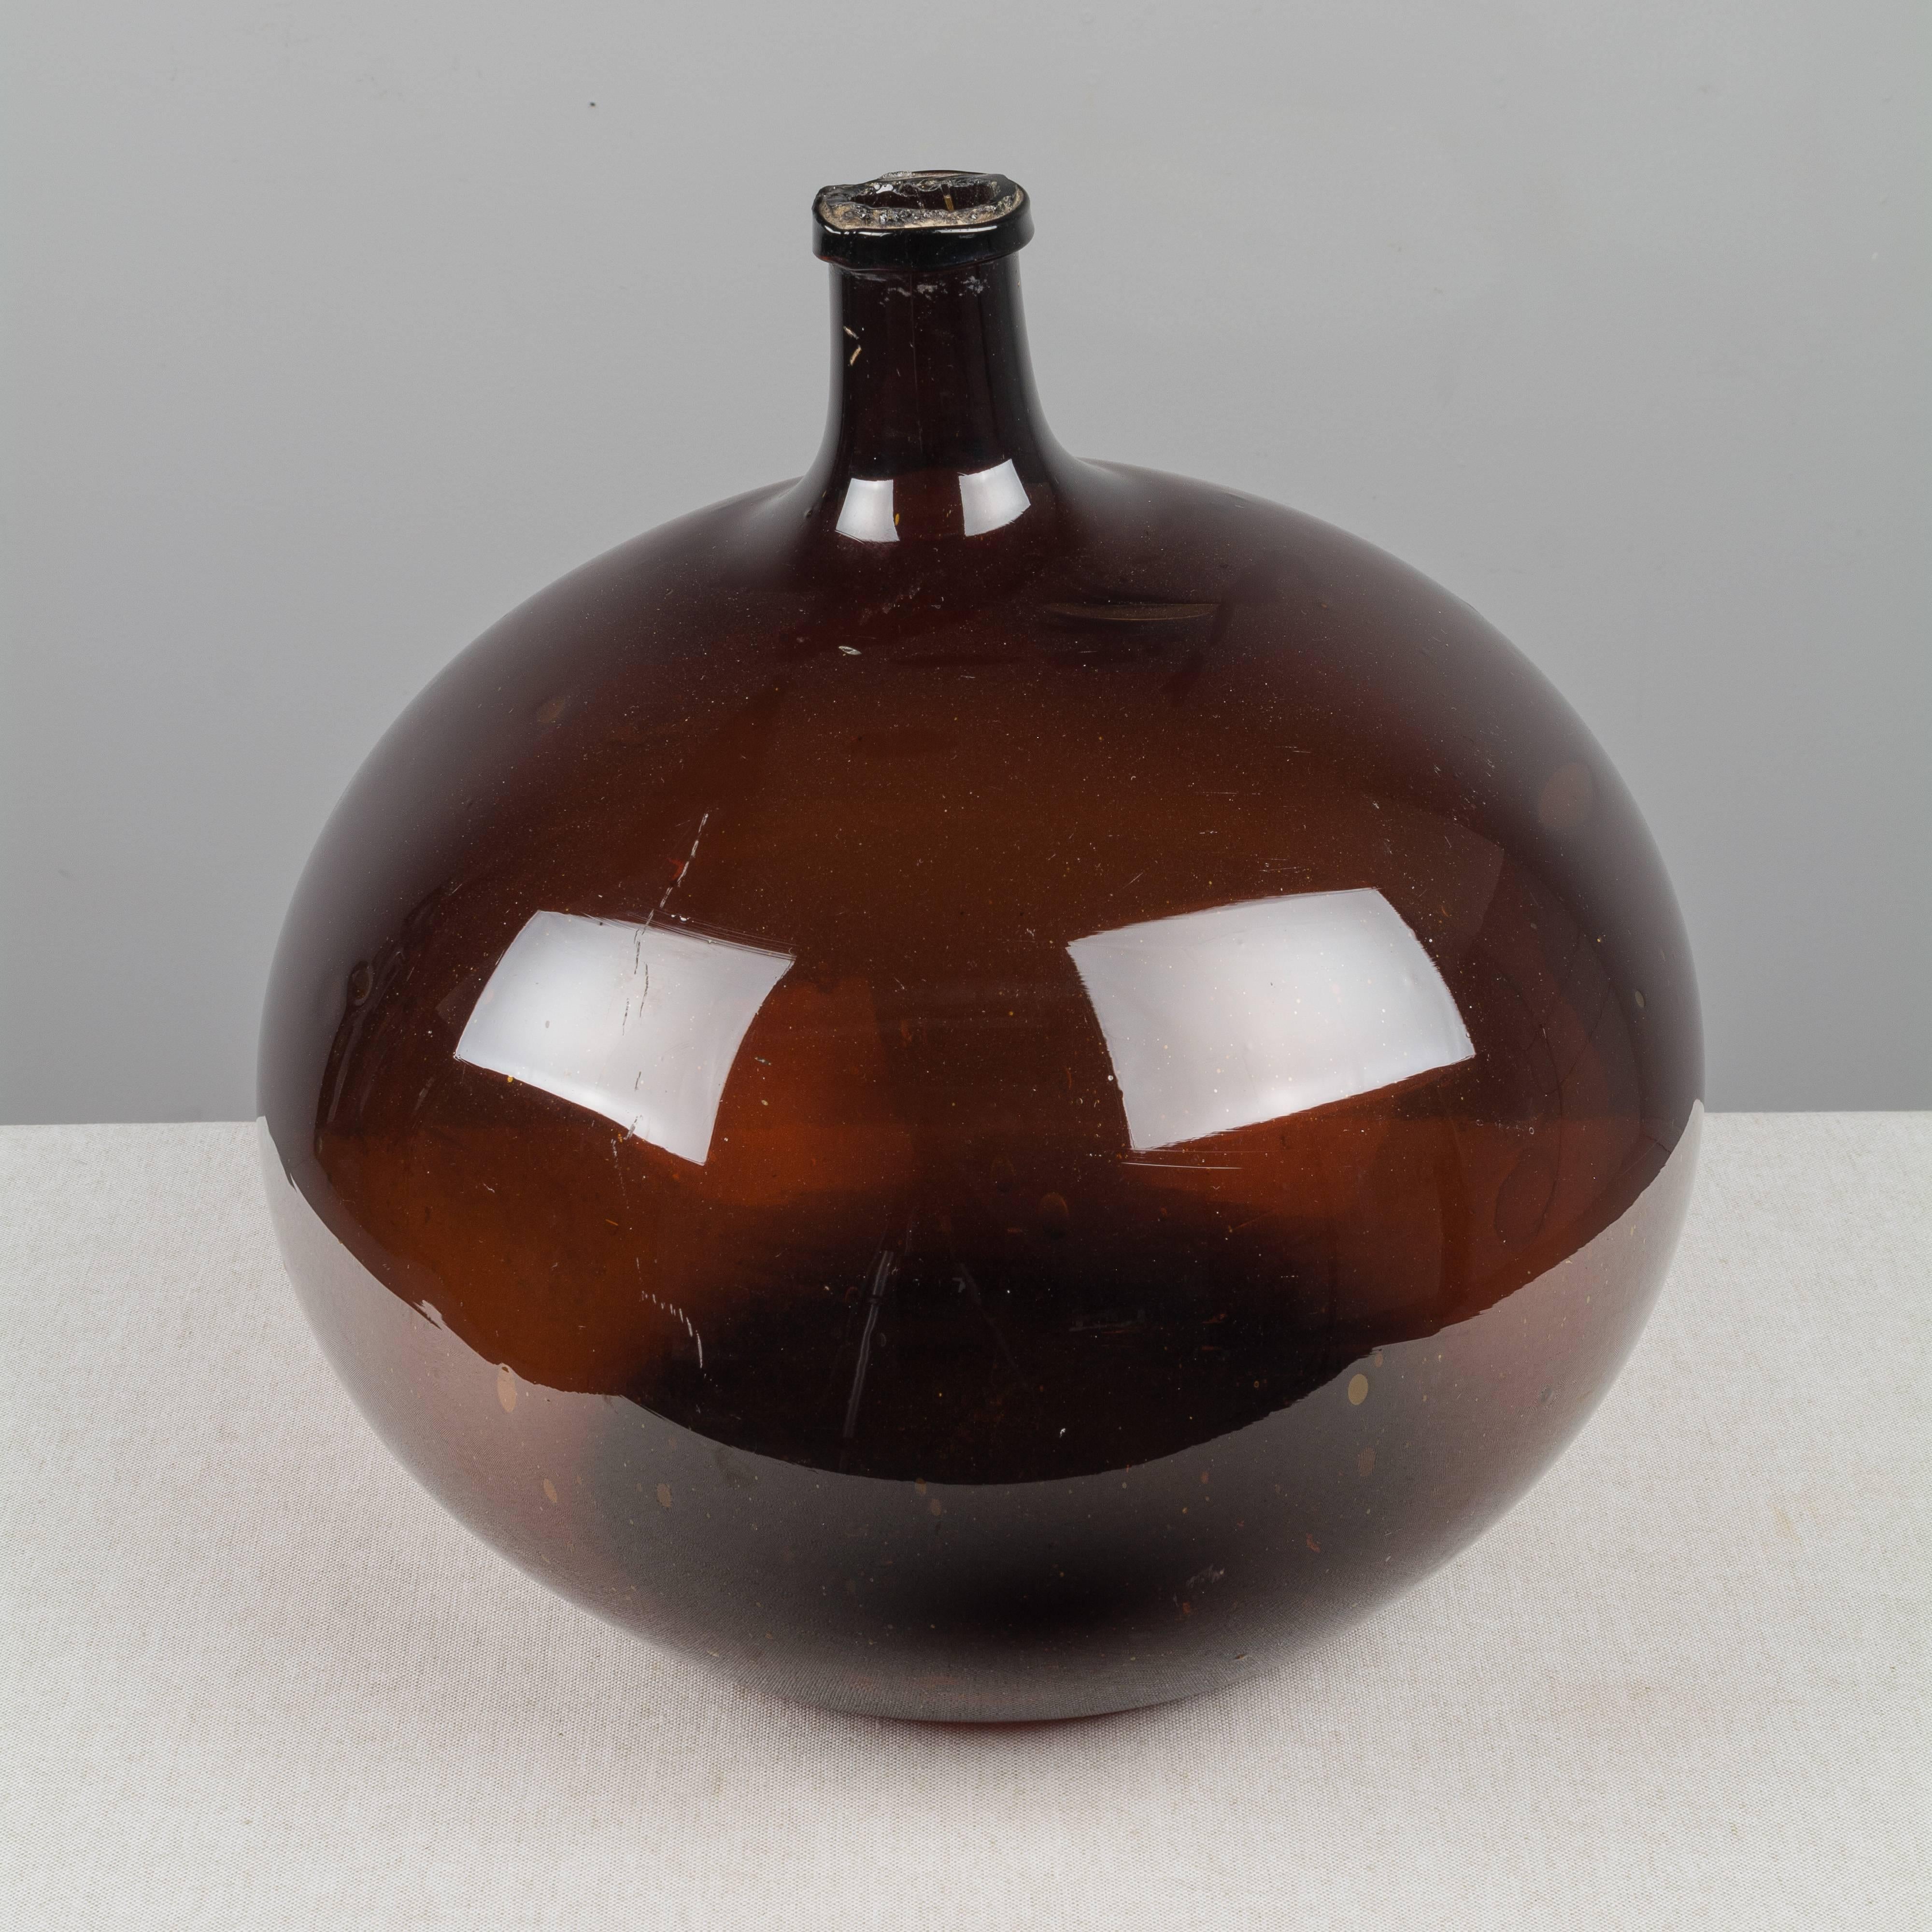 A large 19th century French globular form amber demijohn bottle with air bubbles typical of handblown glass. Please refer to photos for more details. We have a large selection of French antiques at Olivier Fleury, Inc.  Please visit our showroom in